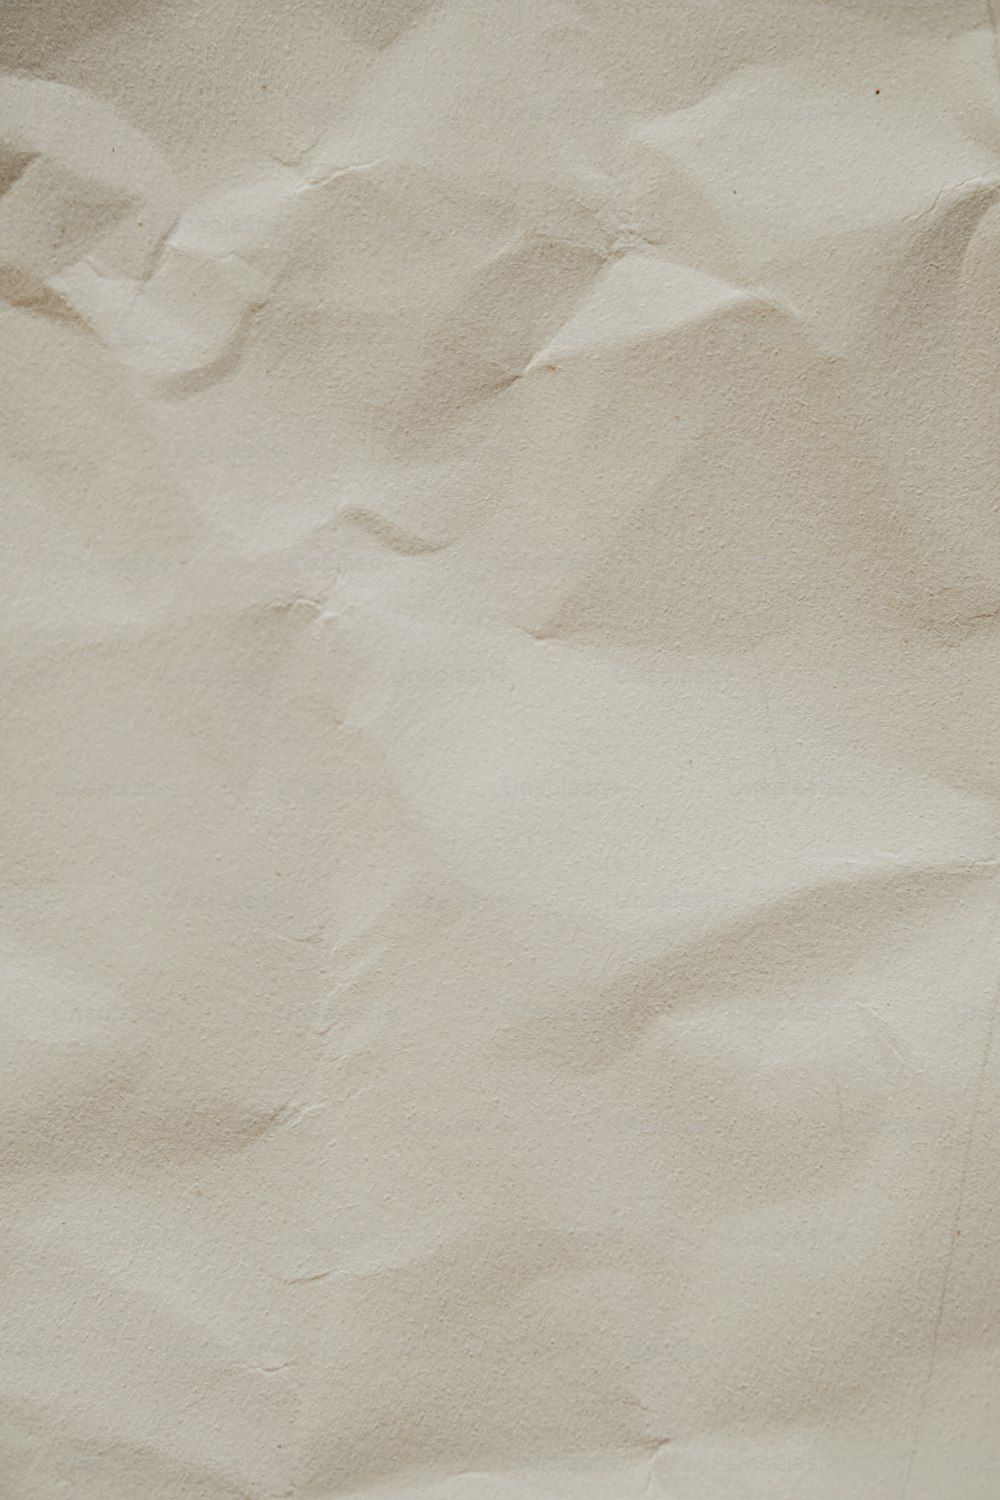 Paper Texture Picture HD